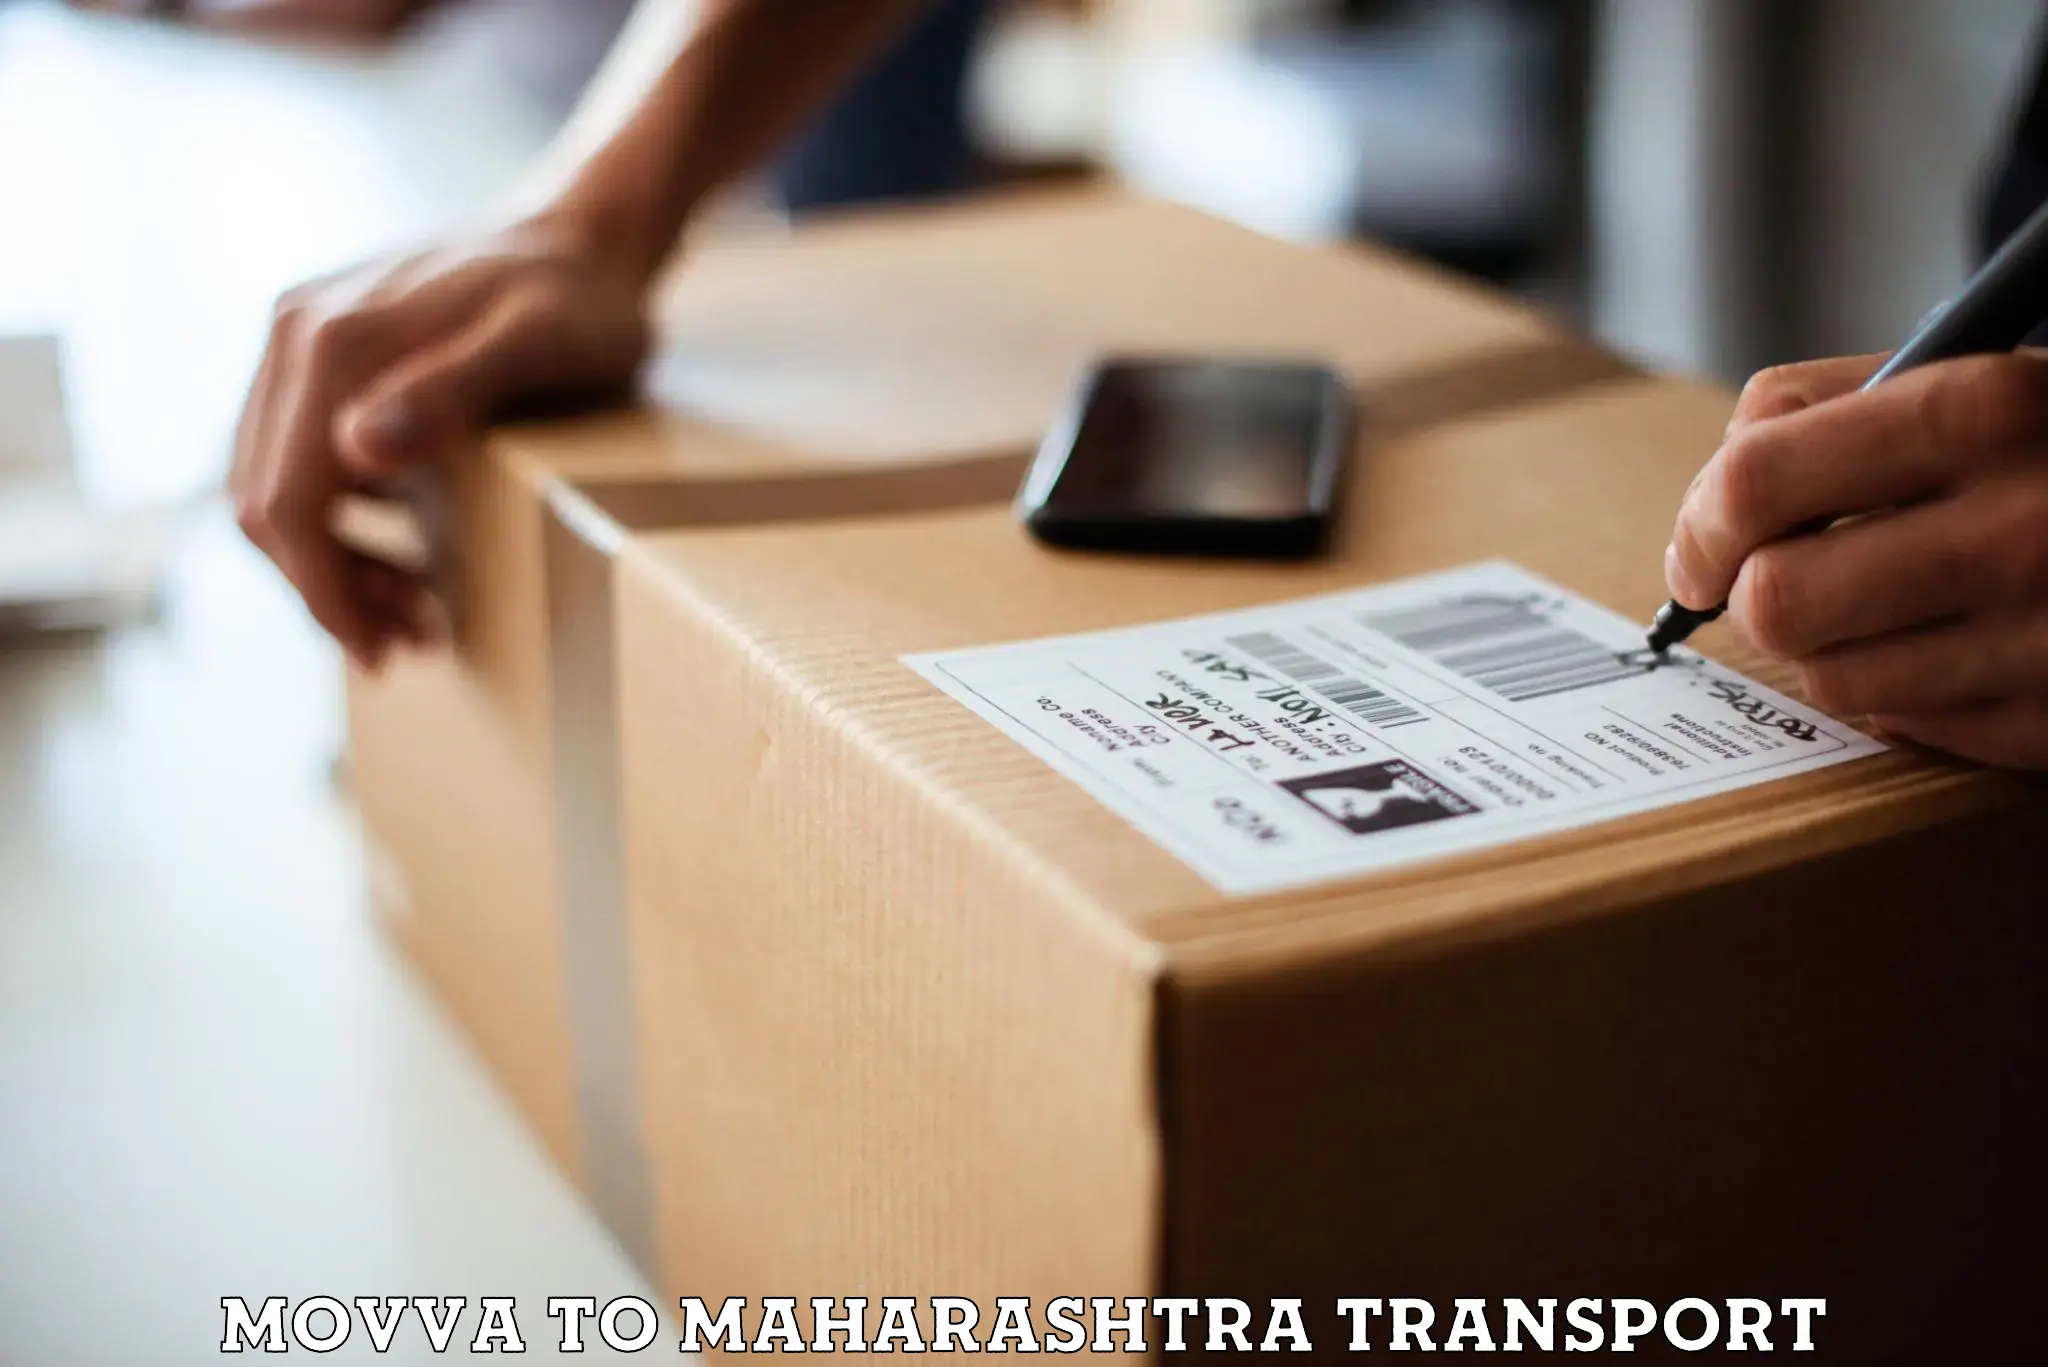 Express transport services Movva to Osmanabad